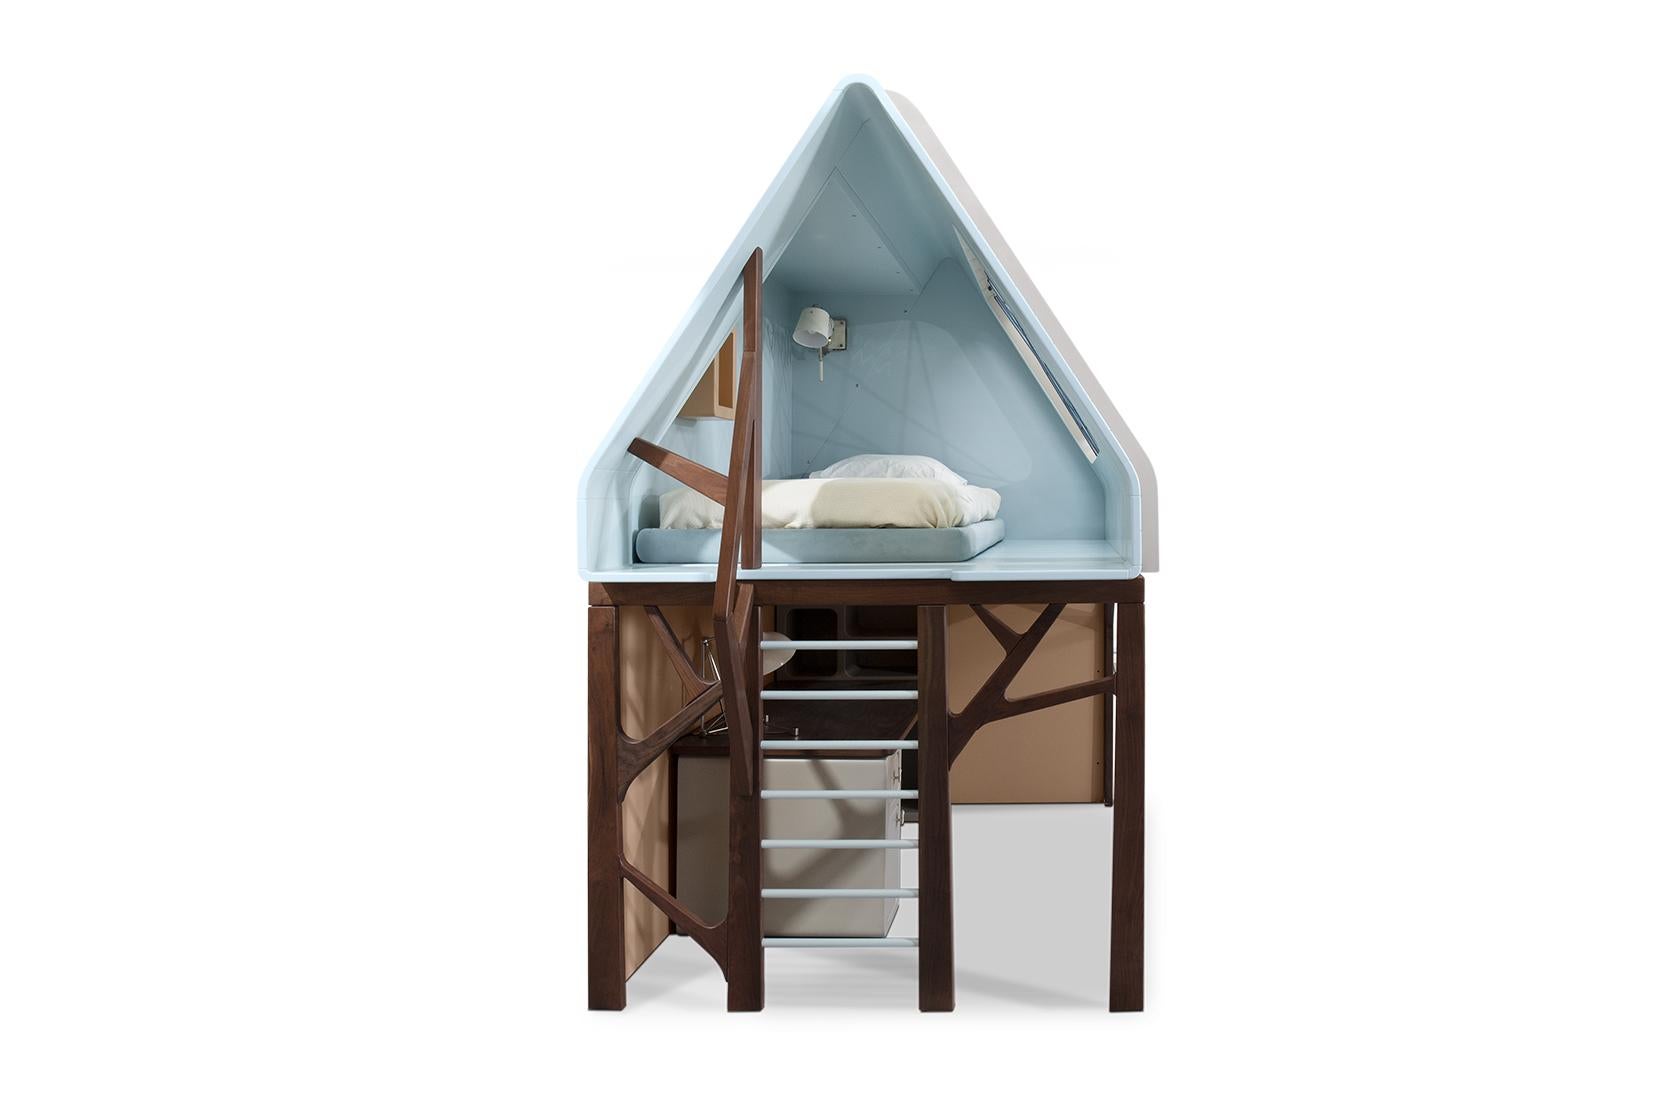 Inspired by the Jungle Book, the Mogli Playhouse was designed by using the elements and the wonders of nature. It's a dream come true for kids who love the outdoors so much they wish to bring it inside. With this playhouse, there's no limit to